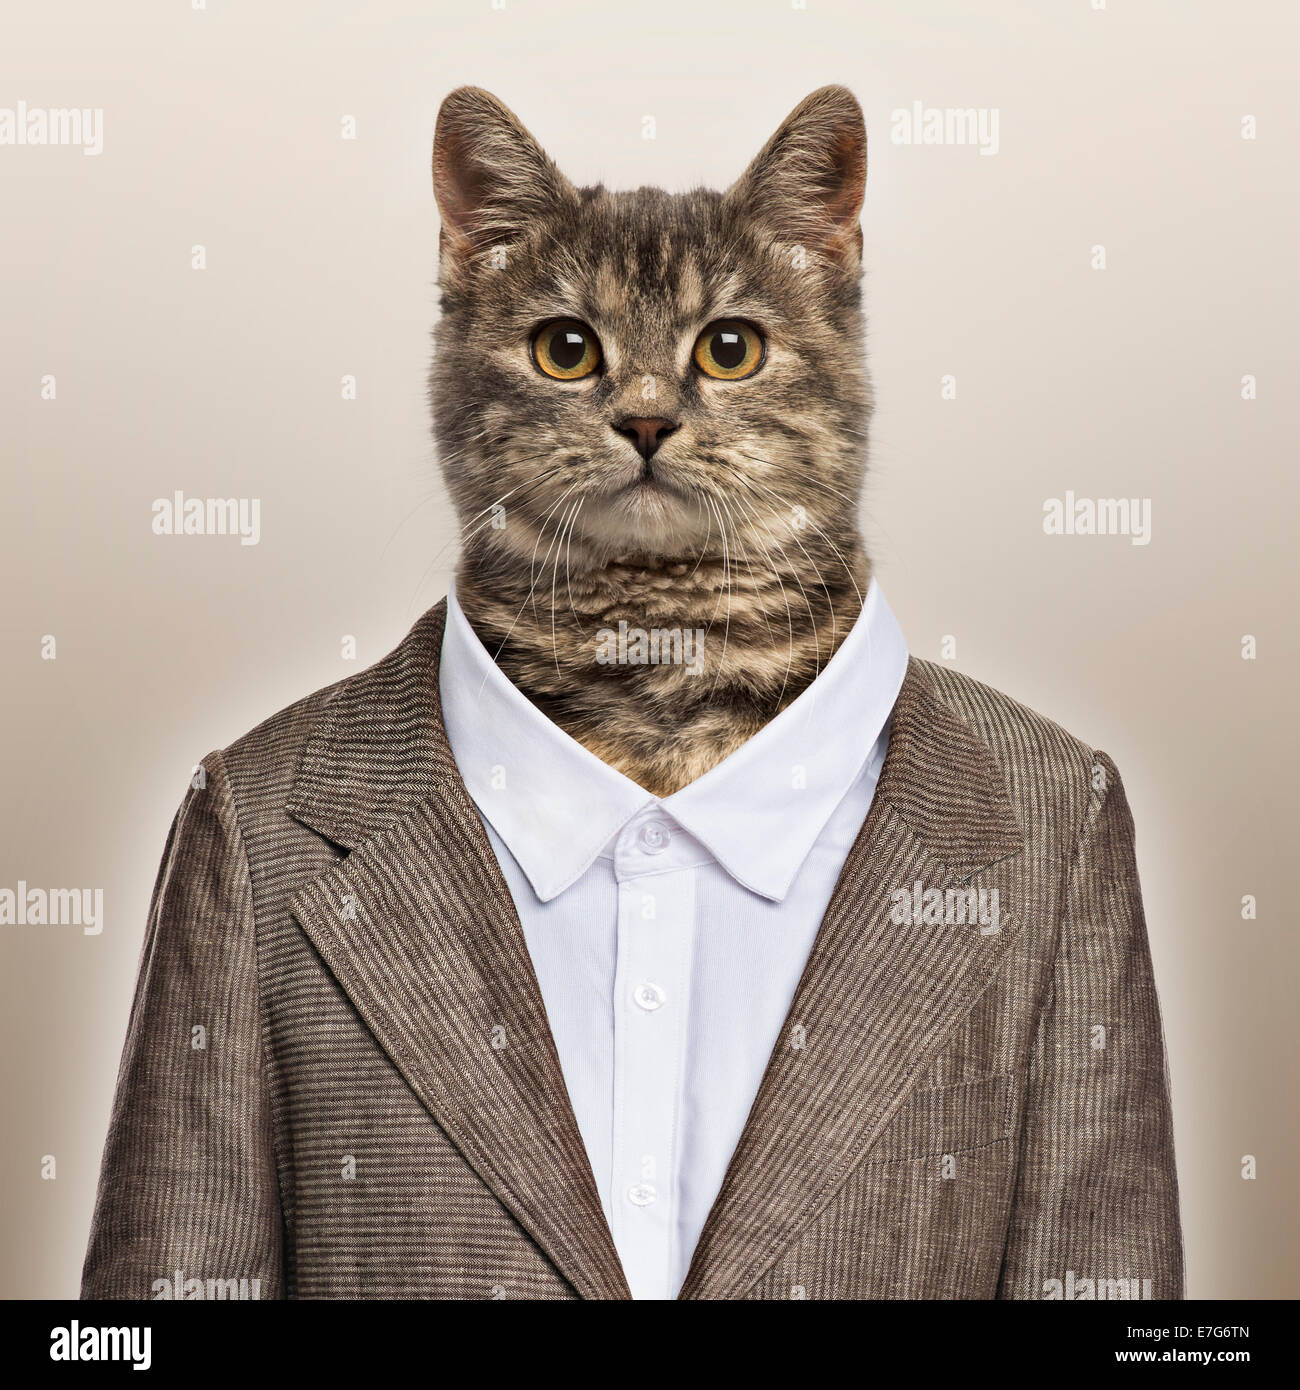 European Shorthair wearing a suit in front of a beige background Stock Photo